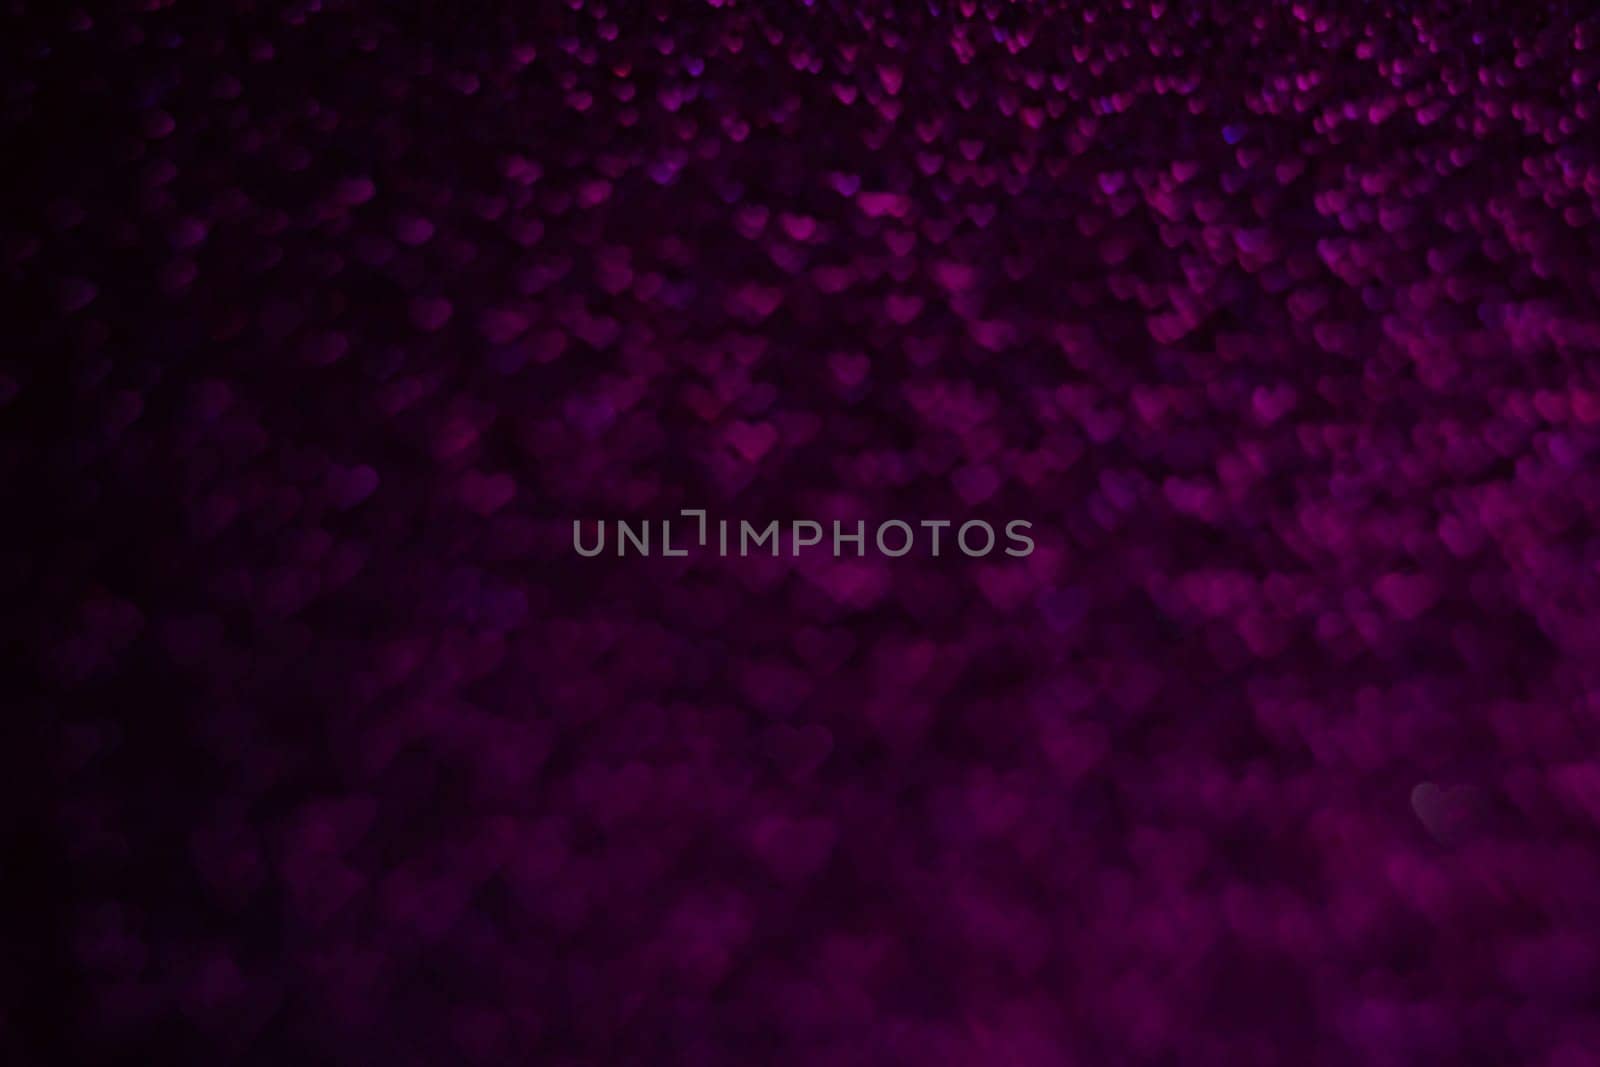 A purple background with many small hearts scattered throughout. The image has a romantic and dreamy feel to it